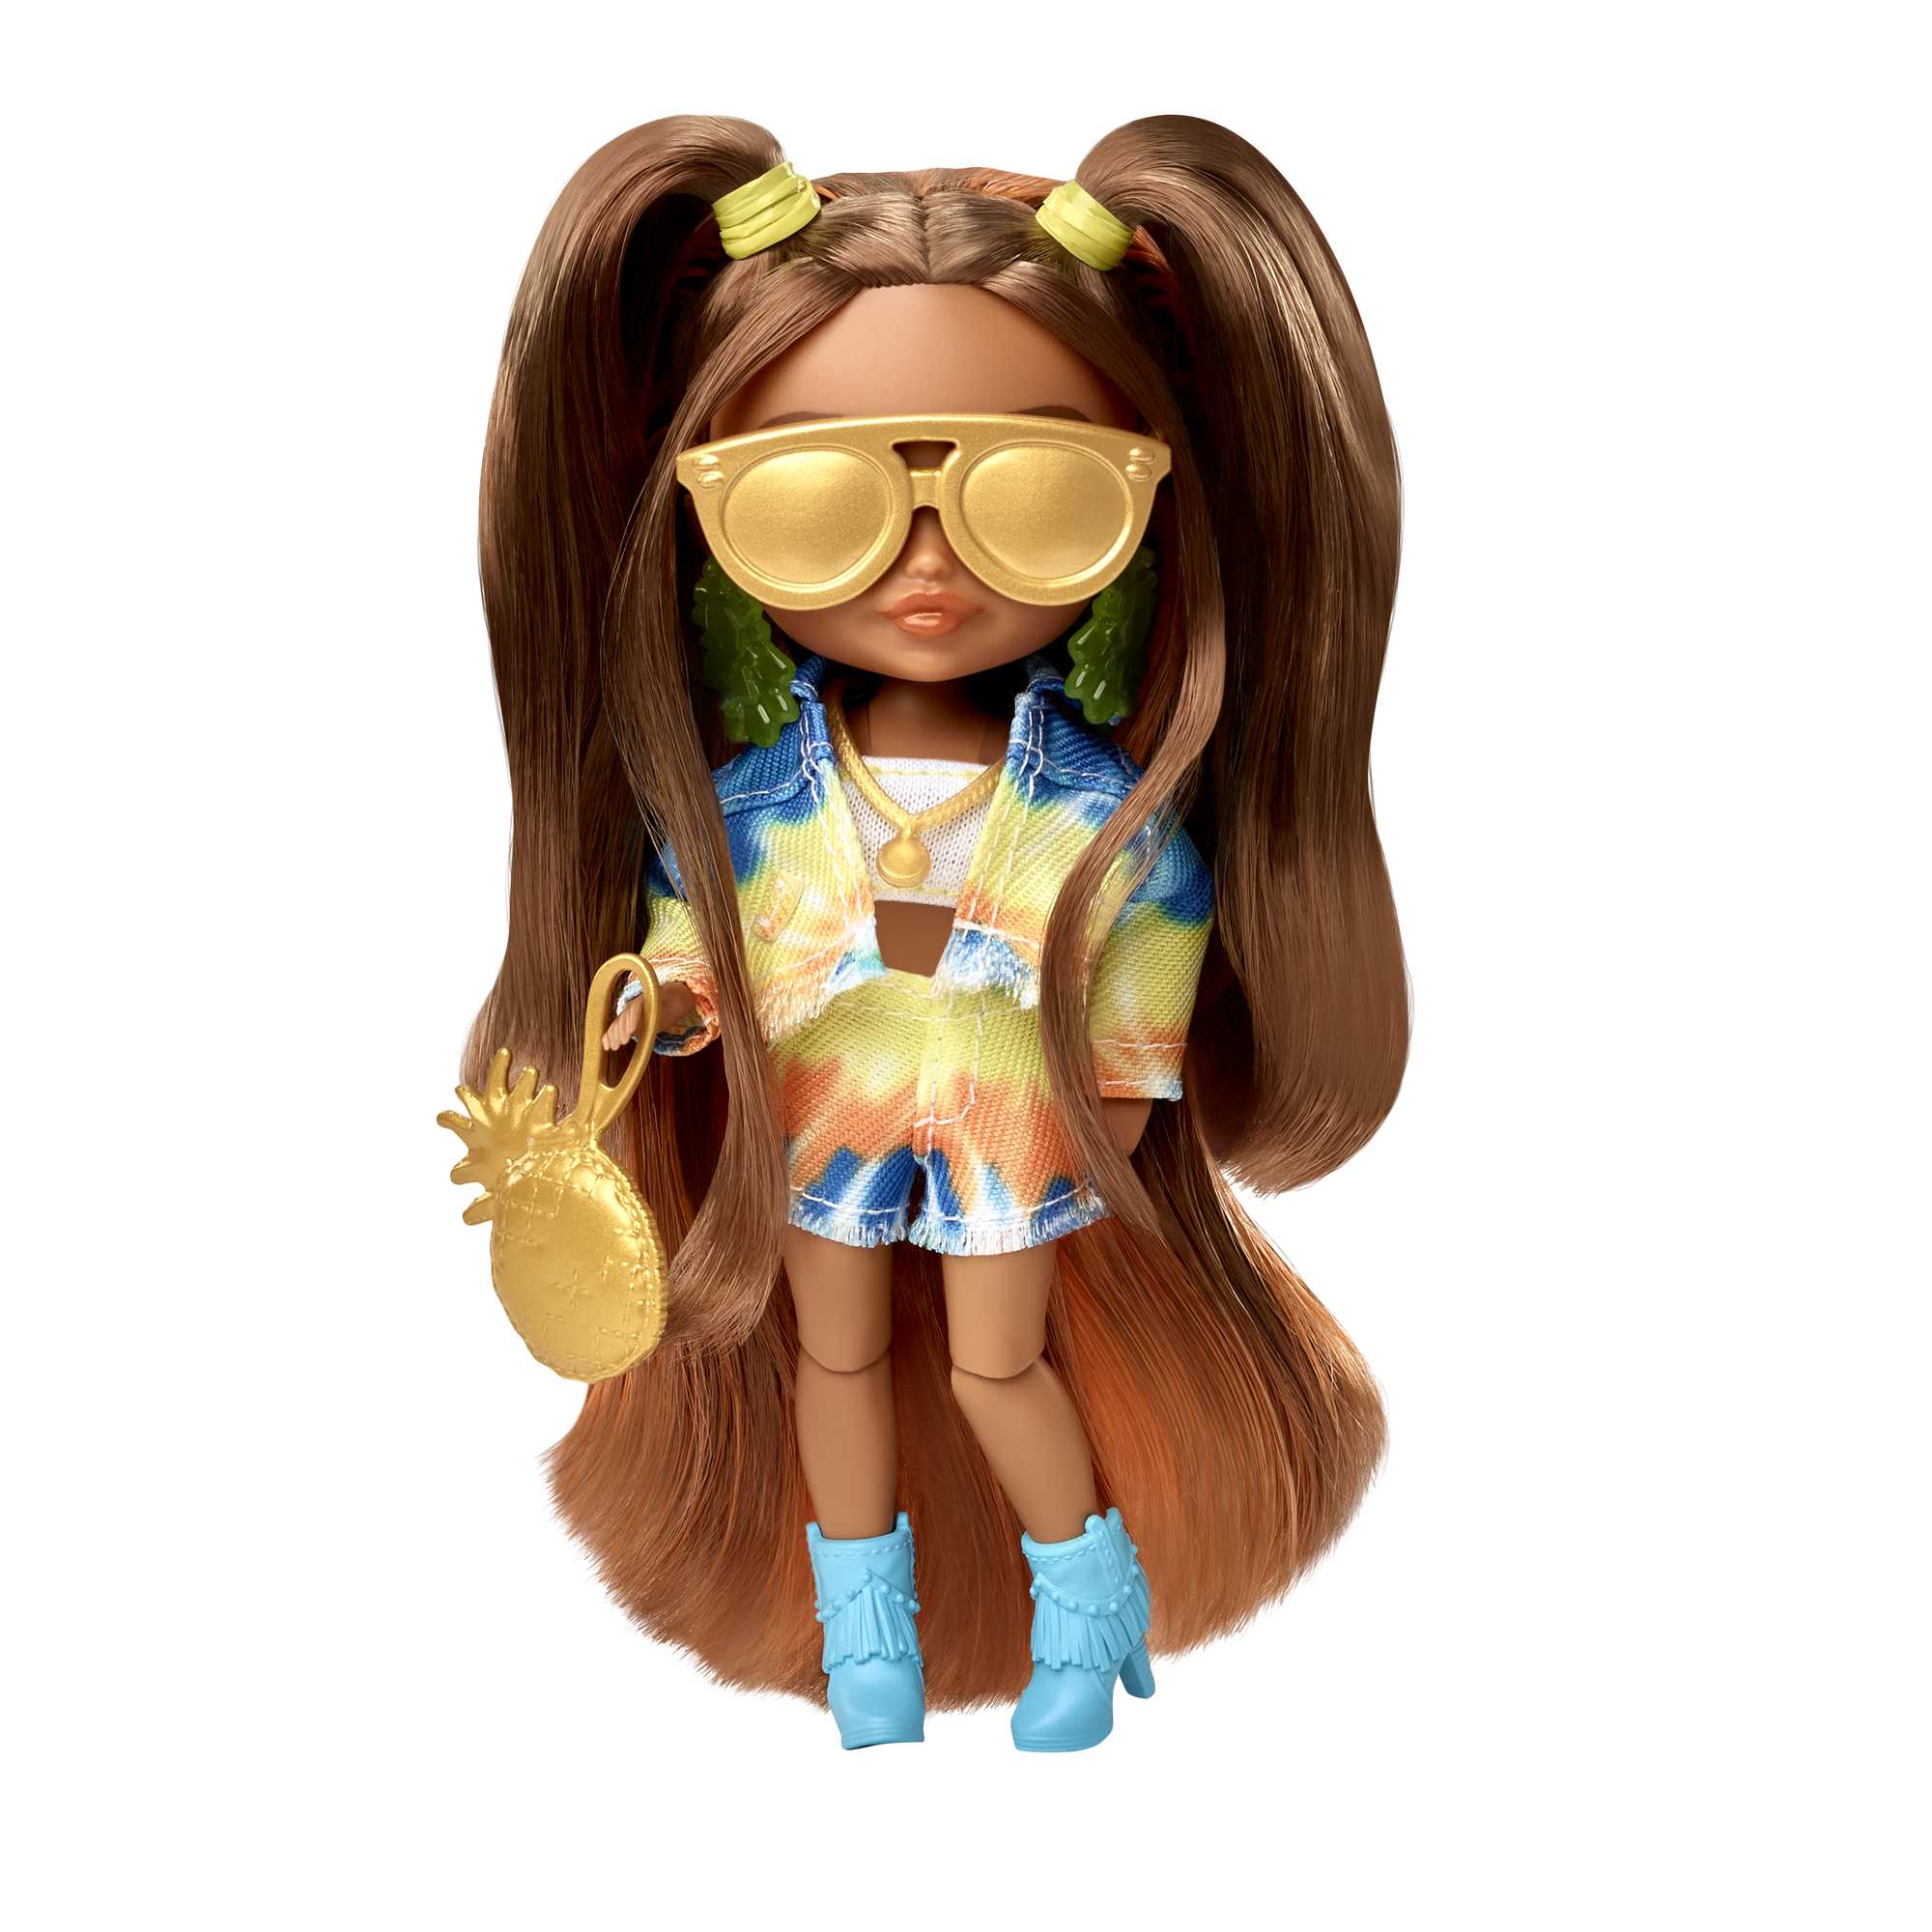 Barbie Extra Minis Doll #5 with Extra-Long Ombre Hair in Tie-Dye Jacket & Shorts with Accessories - image 5 of 6